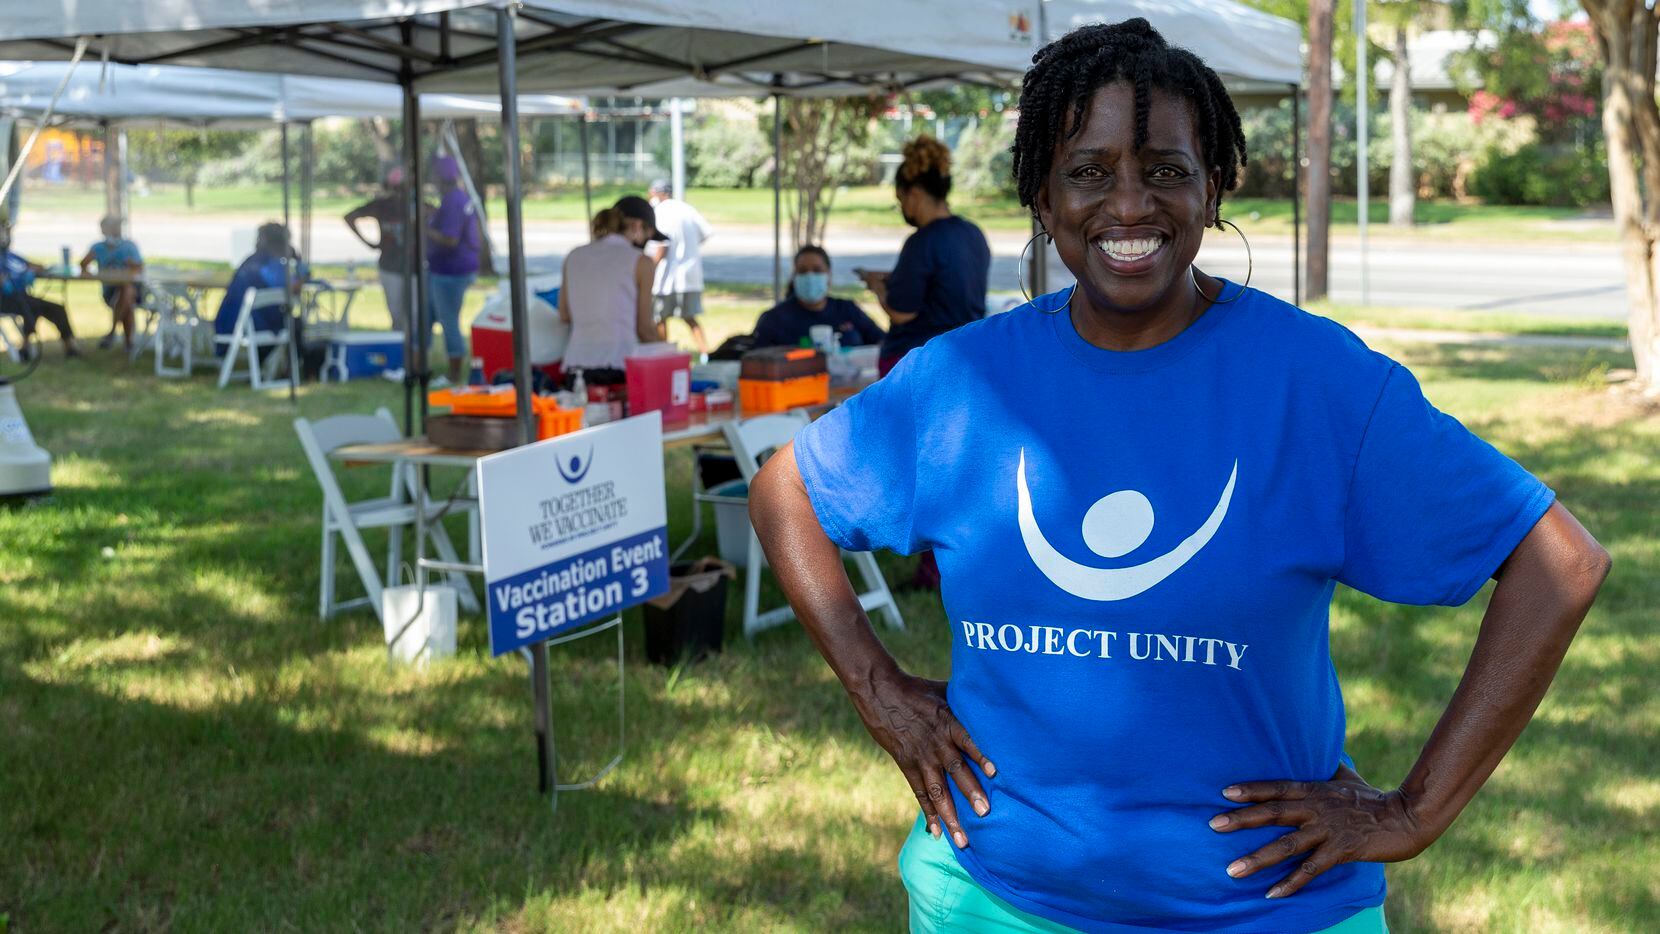 Marian A Williams, co-coordinator for outreach at St. Luke Community United Methodist Church, pictured during a Project Unity COVID-19 vaccine clinic at Frazier Townhomes Community Center on Saturday, July 31, 2021, in Dallas.